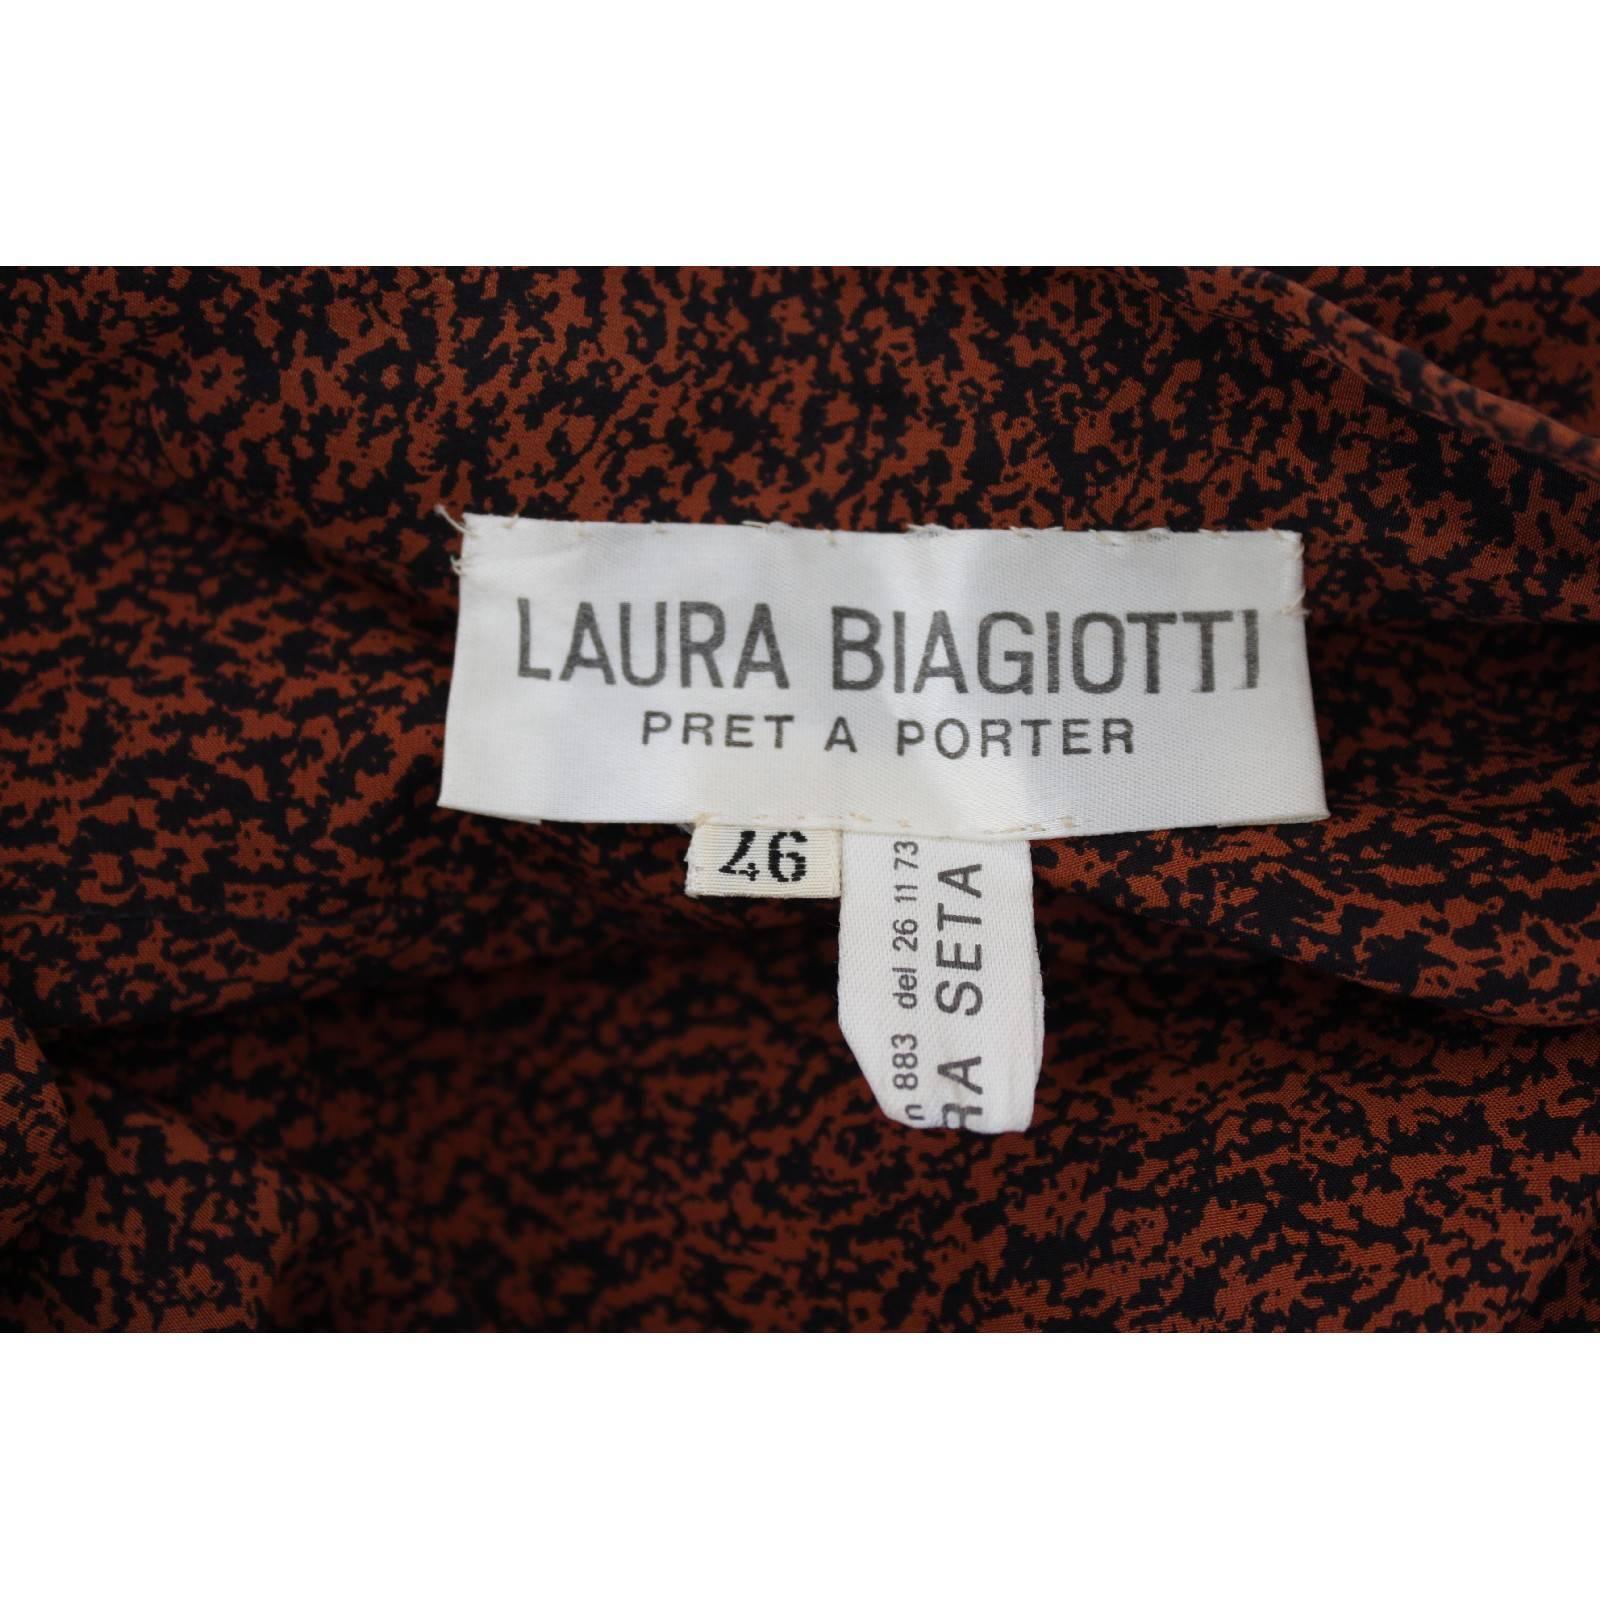 Women's Laura Biagiotti pret a porter silk brown black dress size 46 1980s made italy For Sale